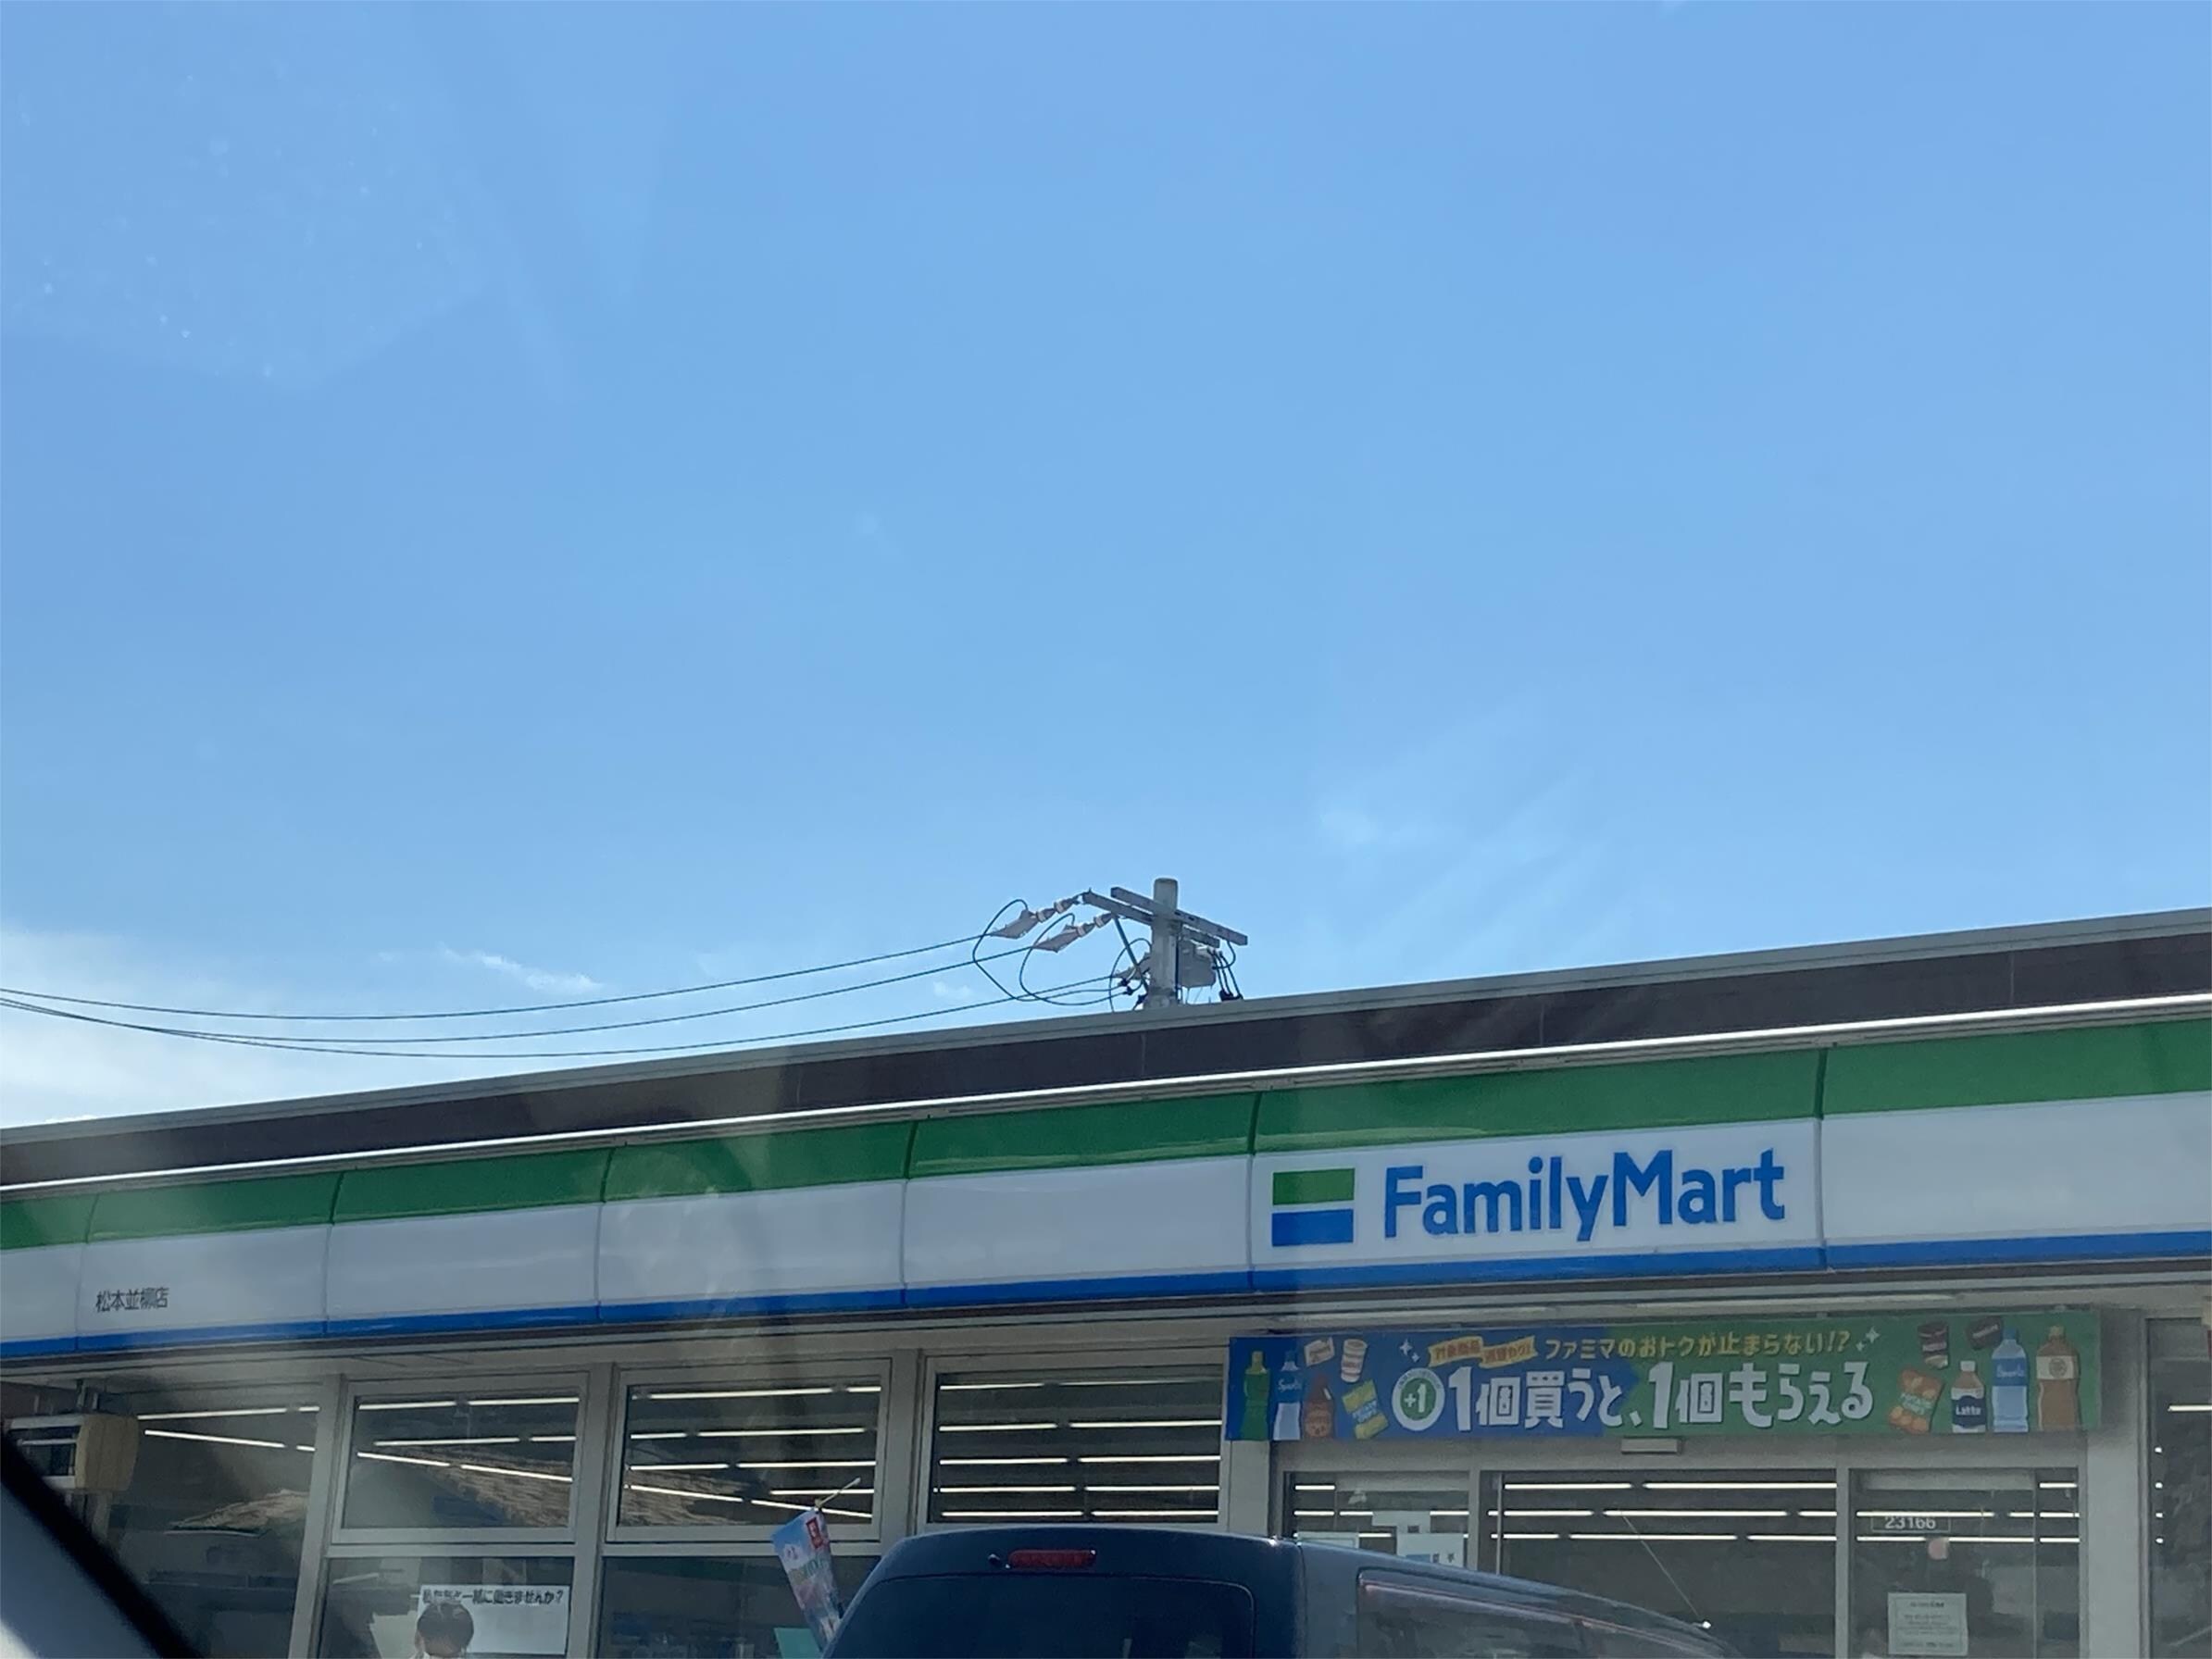 Family Mart（ﾌｧﾐﾘｰﾏｰﾄ） 松本並柳店(コンビニ)まで357m 篠ノ井線/南松本駅 徒歩21分 1階 築20年